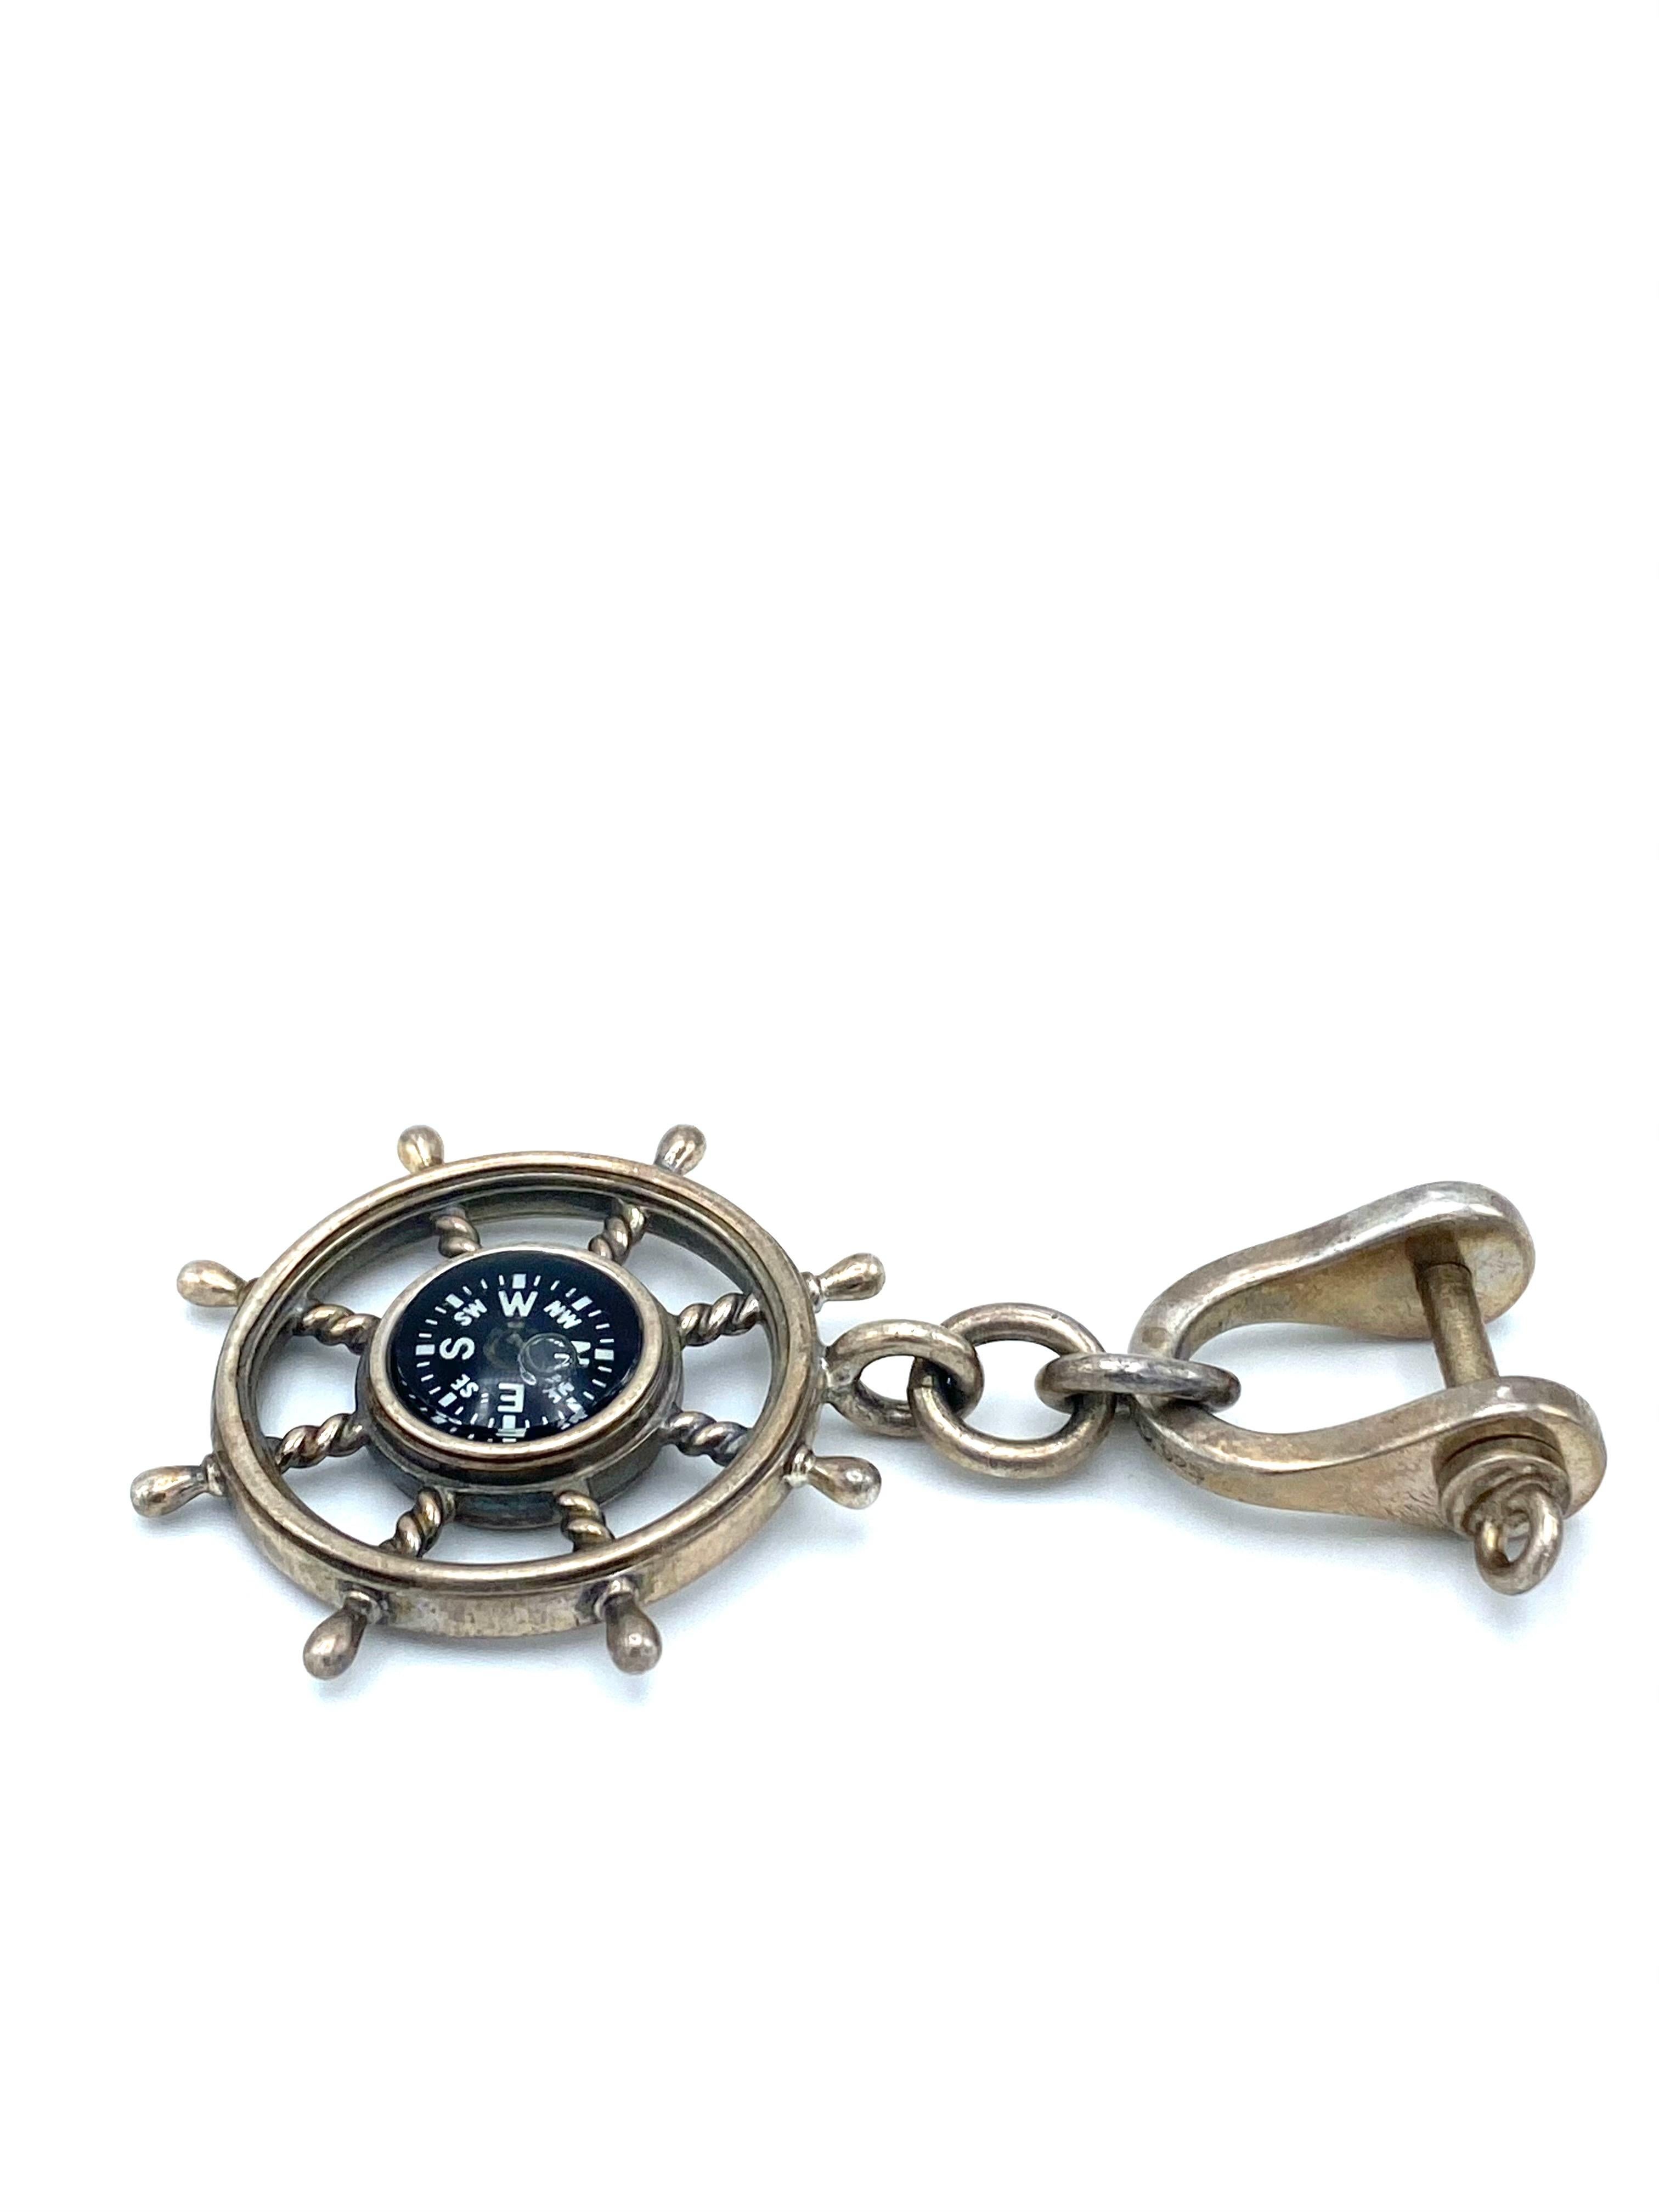 tiffany and co compass